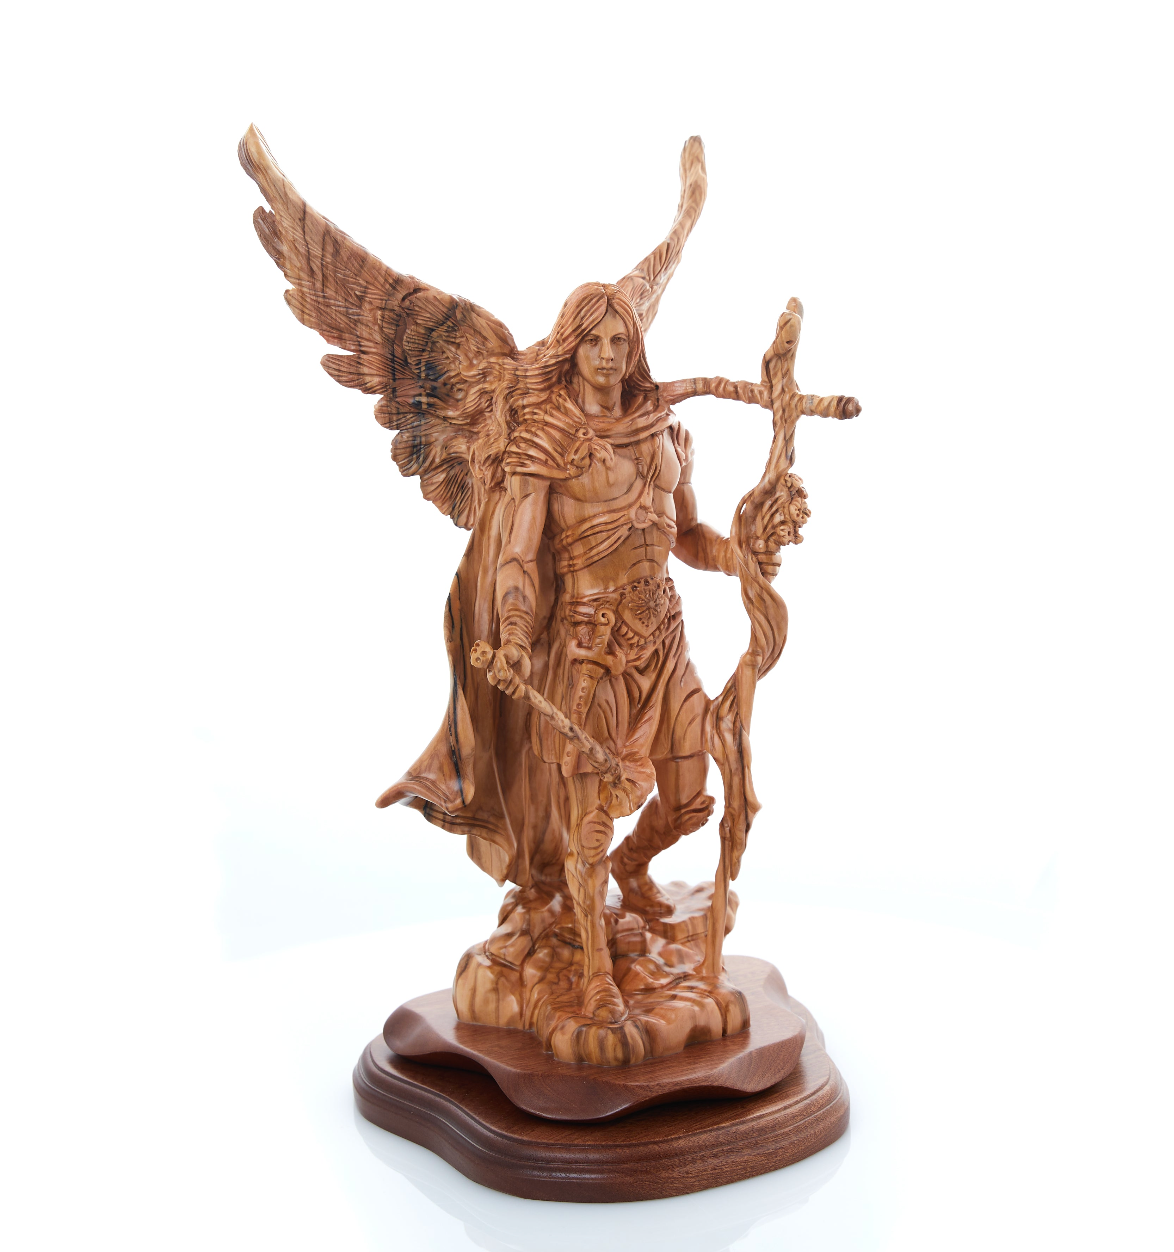 Saint Gabriel the Archangel Masterpiece, with Large Cross and Spike 15 Inches Tall, Olive Wood Carved  Sculpture Statue from Olive Wood Grown in the Holy Land